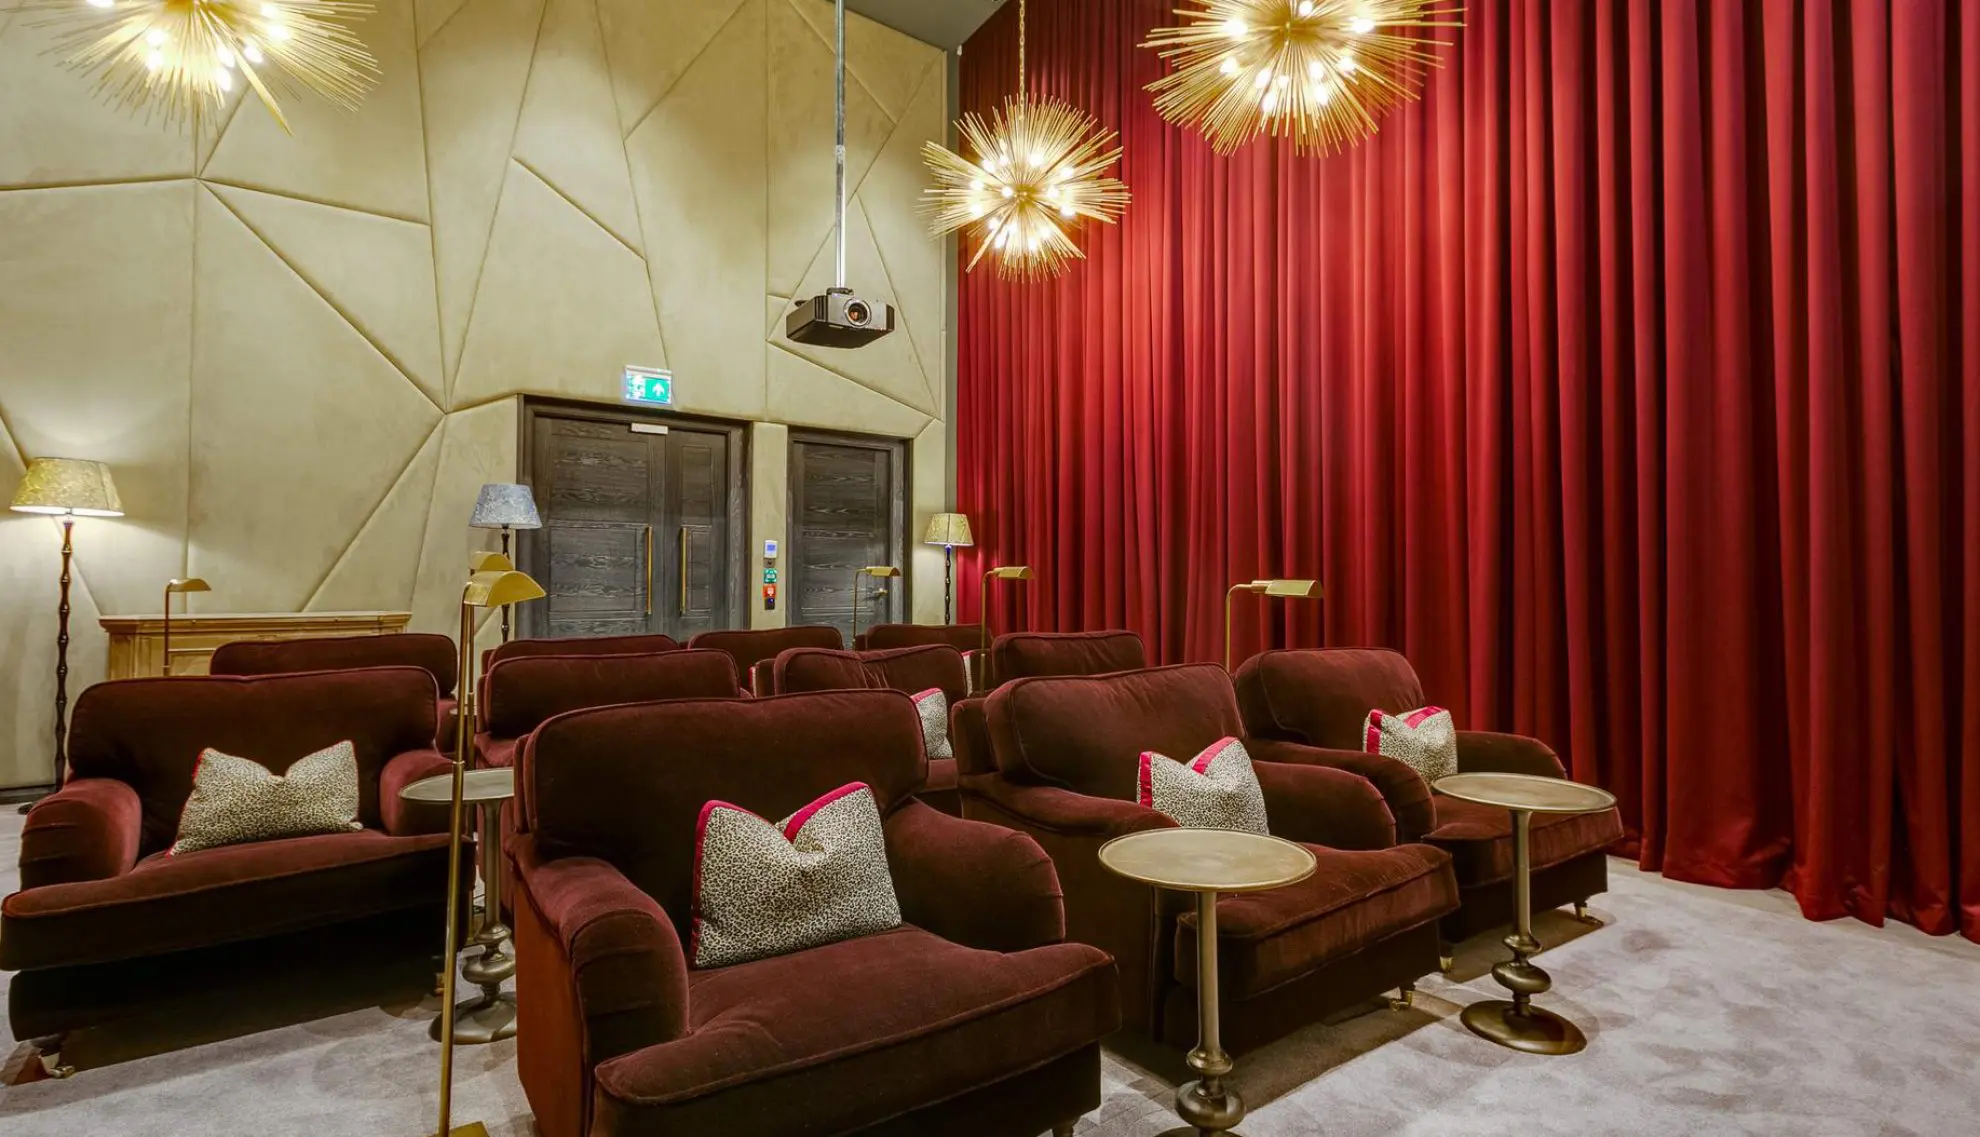 The private cinema at London rental development Sailmakers in Canary Wharf